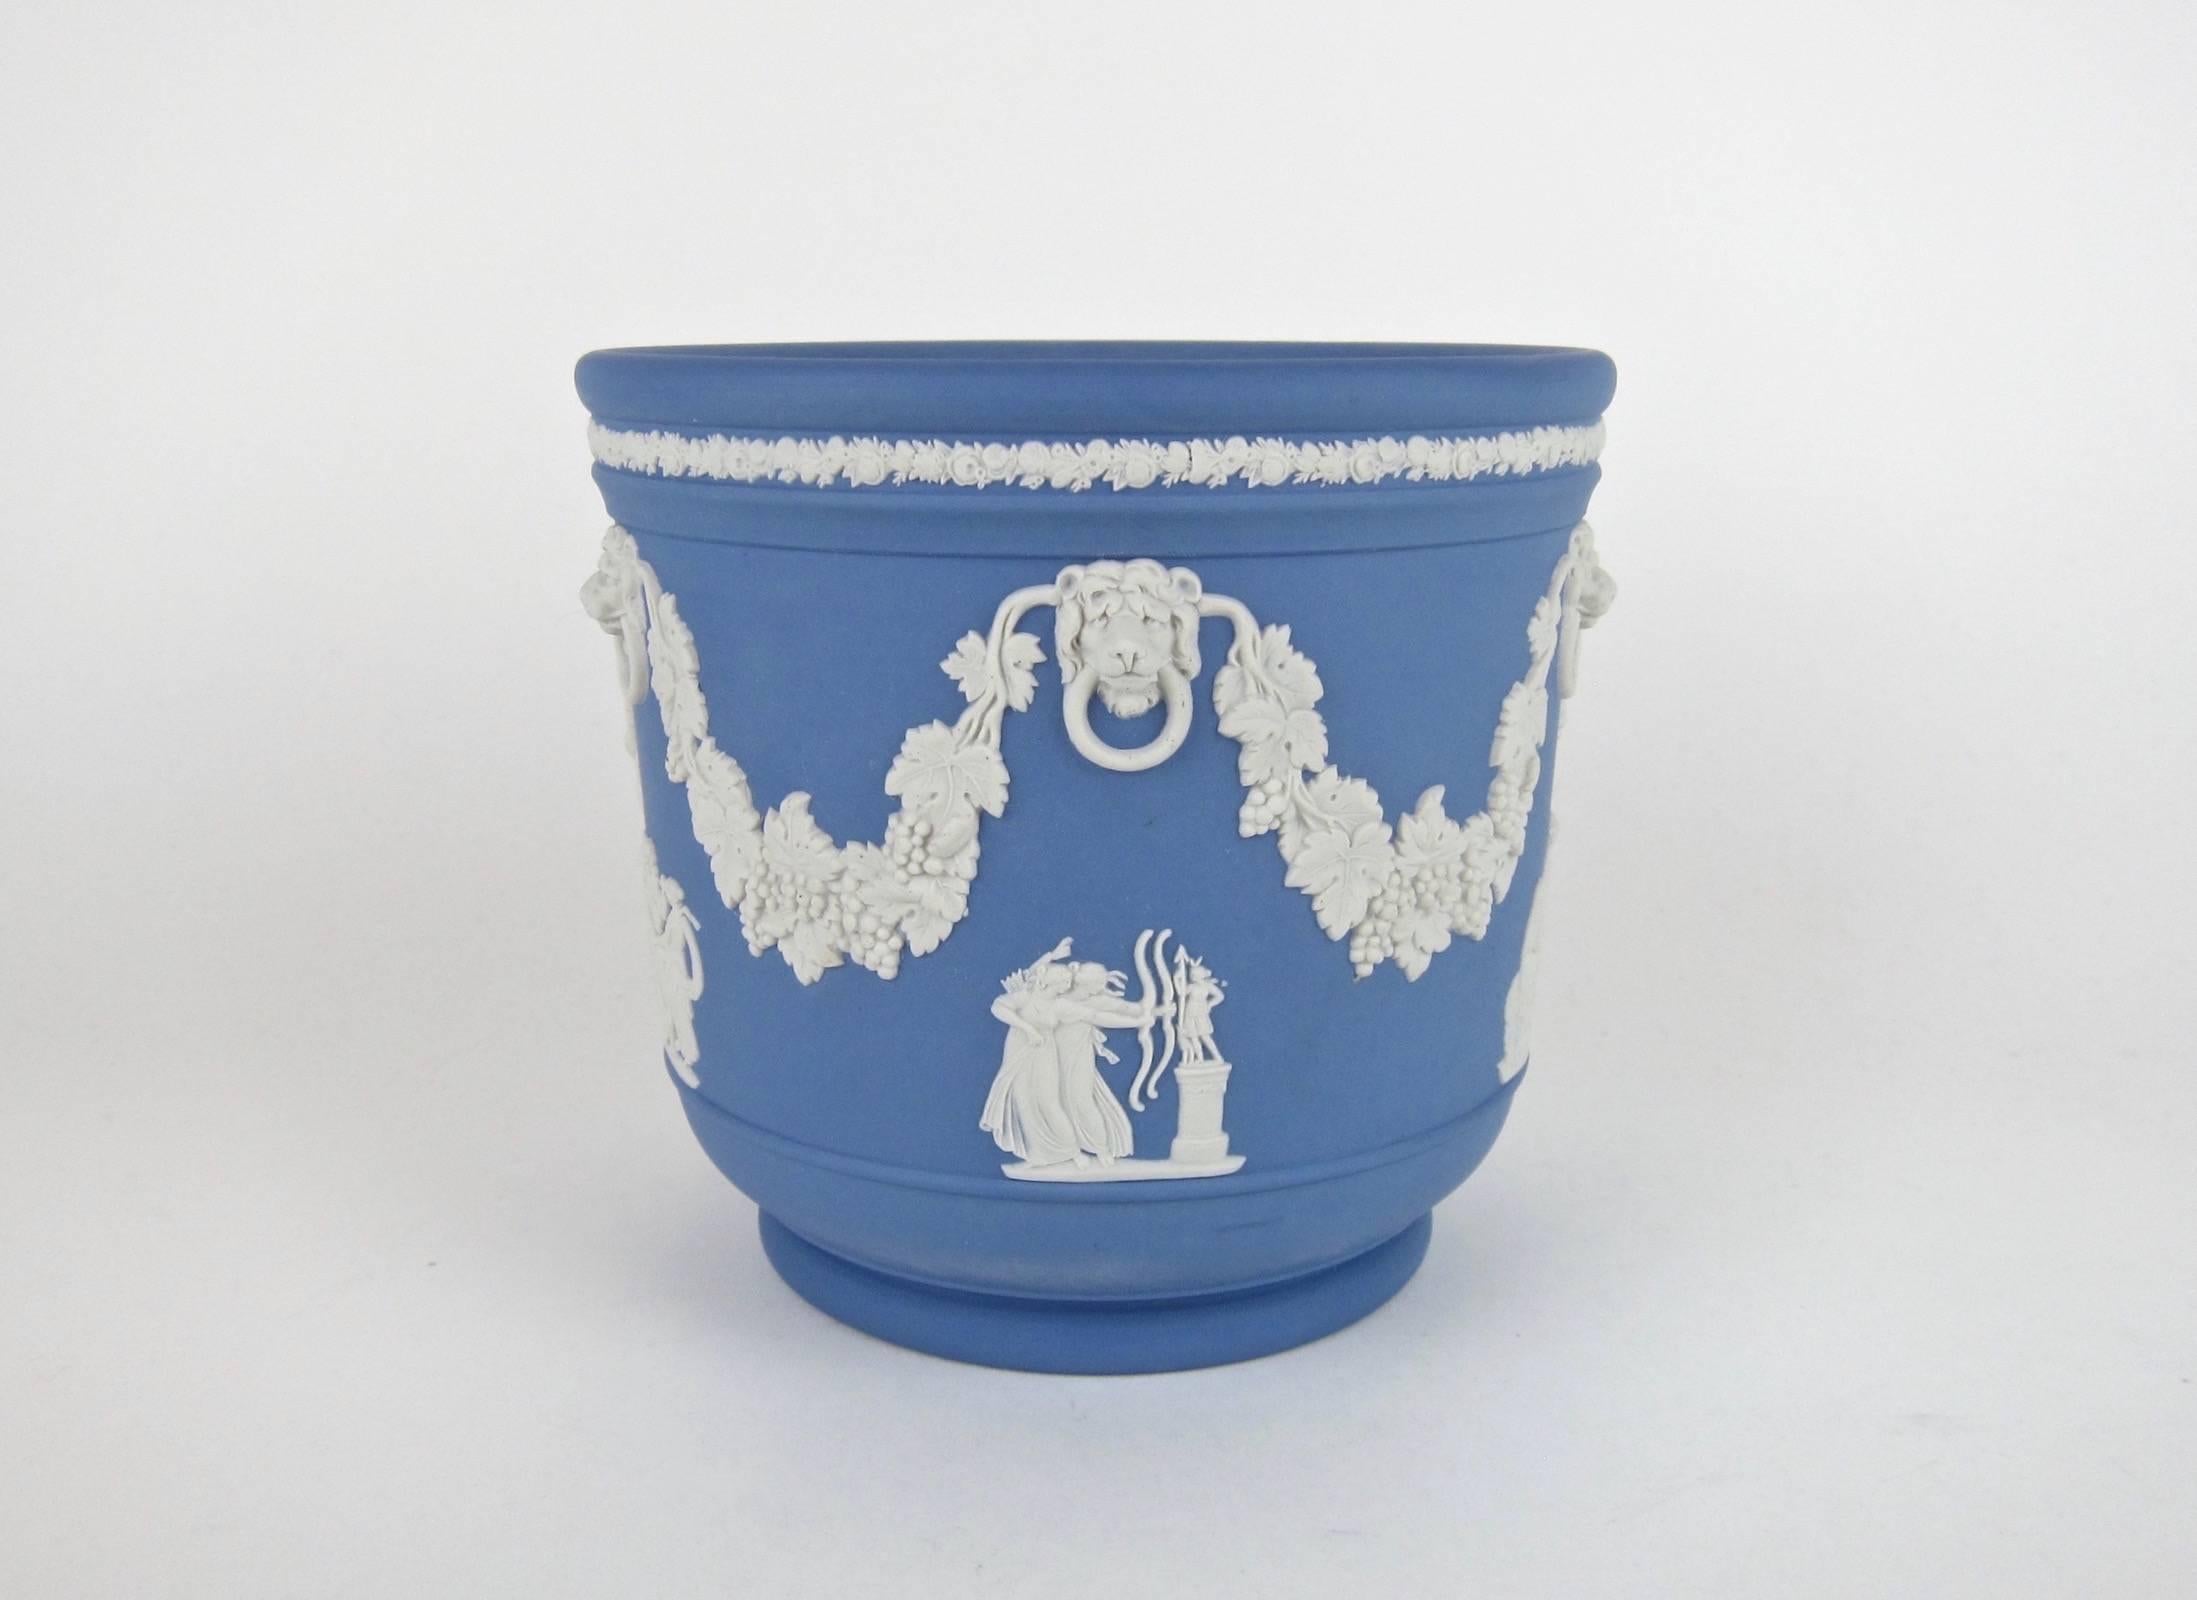 A vintage jardinière or cachepot from an important California collection of English Jasperware by Wedgwood. 

The pale blue solid jasper body is decorated in relief, beginning with an intricate floral border encircling the rim. Grapevine swag